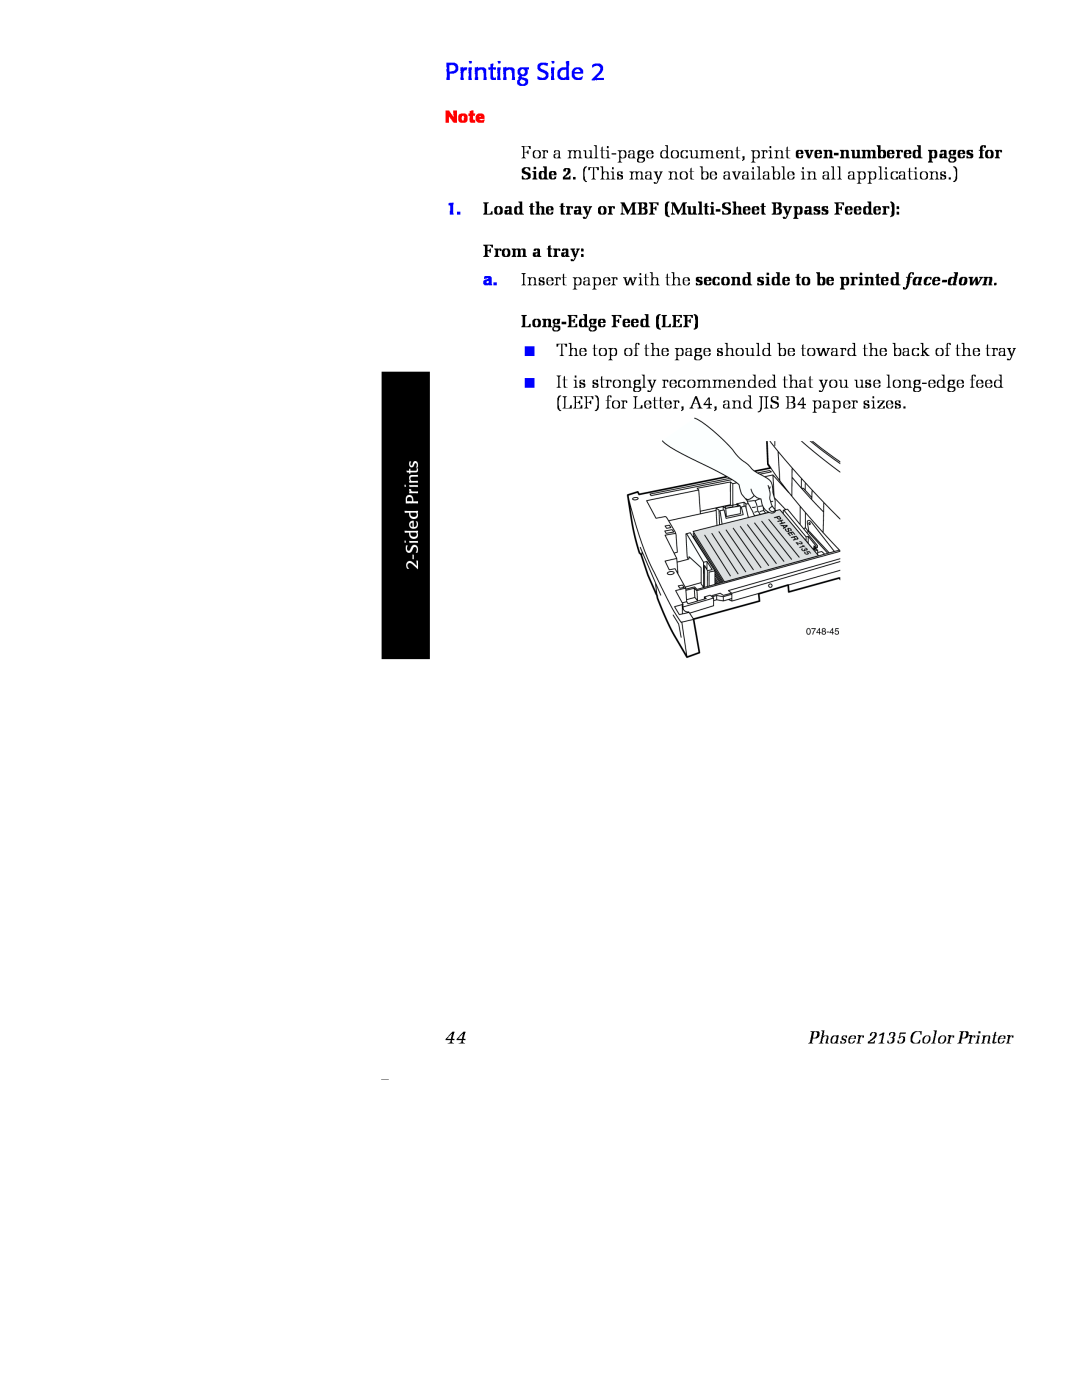 Xerox Phaser 2135 manual a. Insert paper with the second side to be printed face-down, Printing Side, Long-Edge Feed LEF 